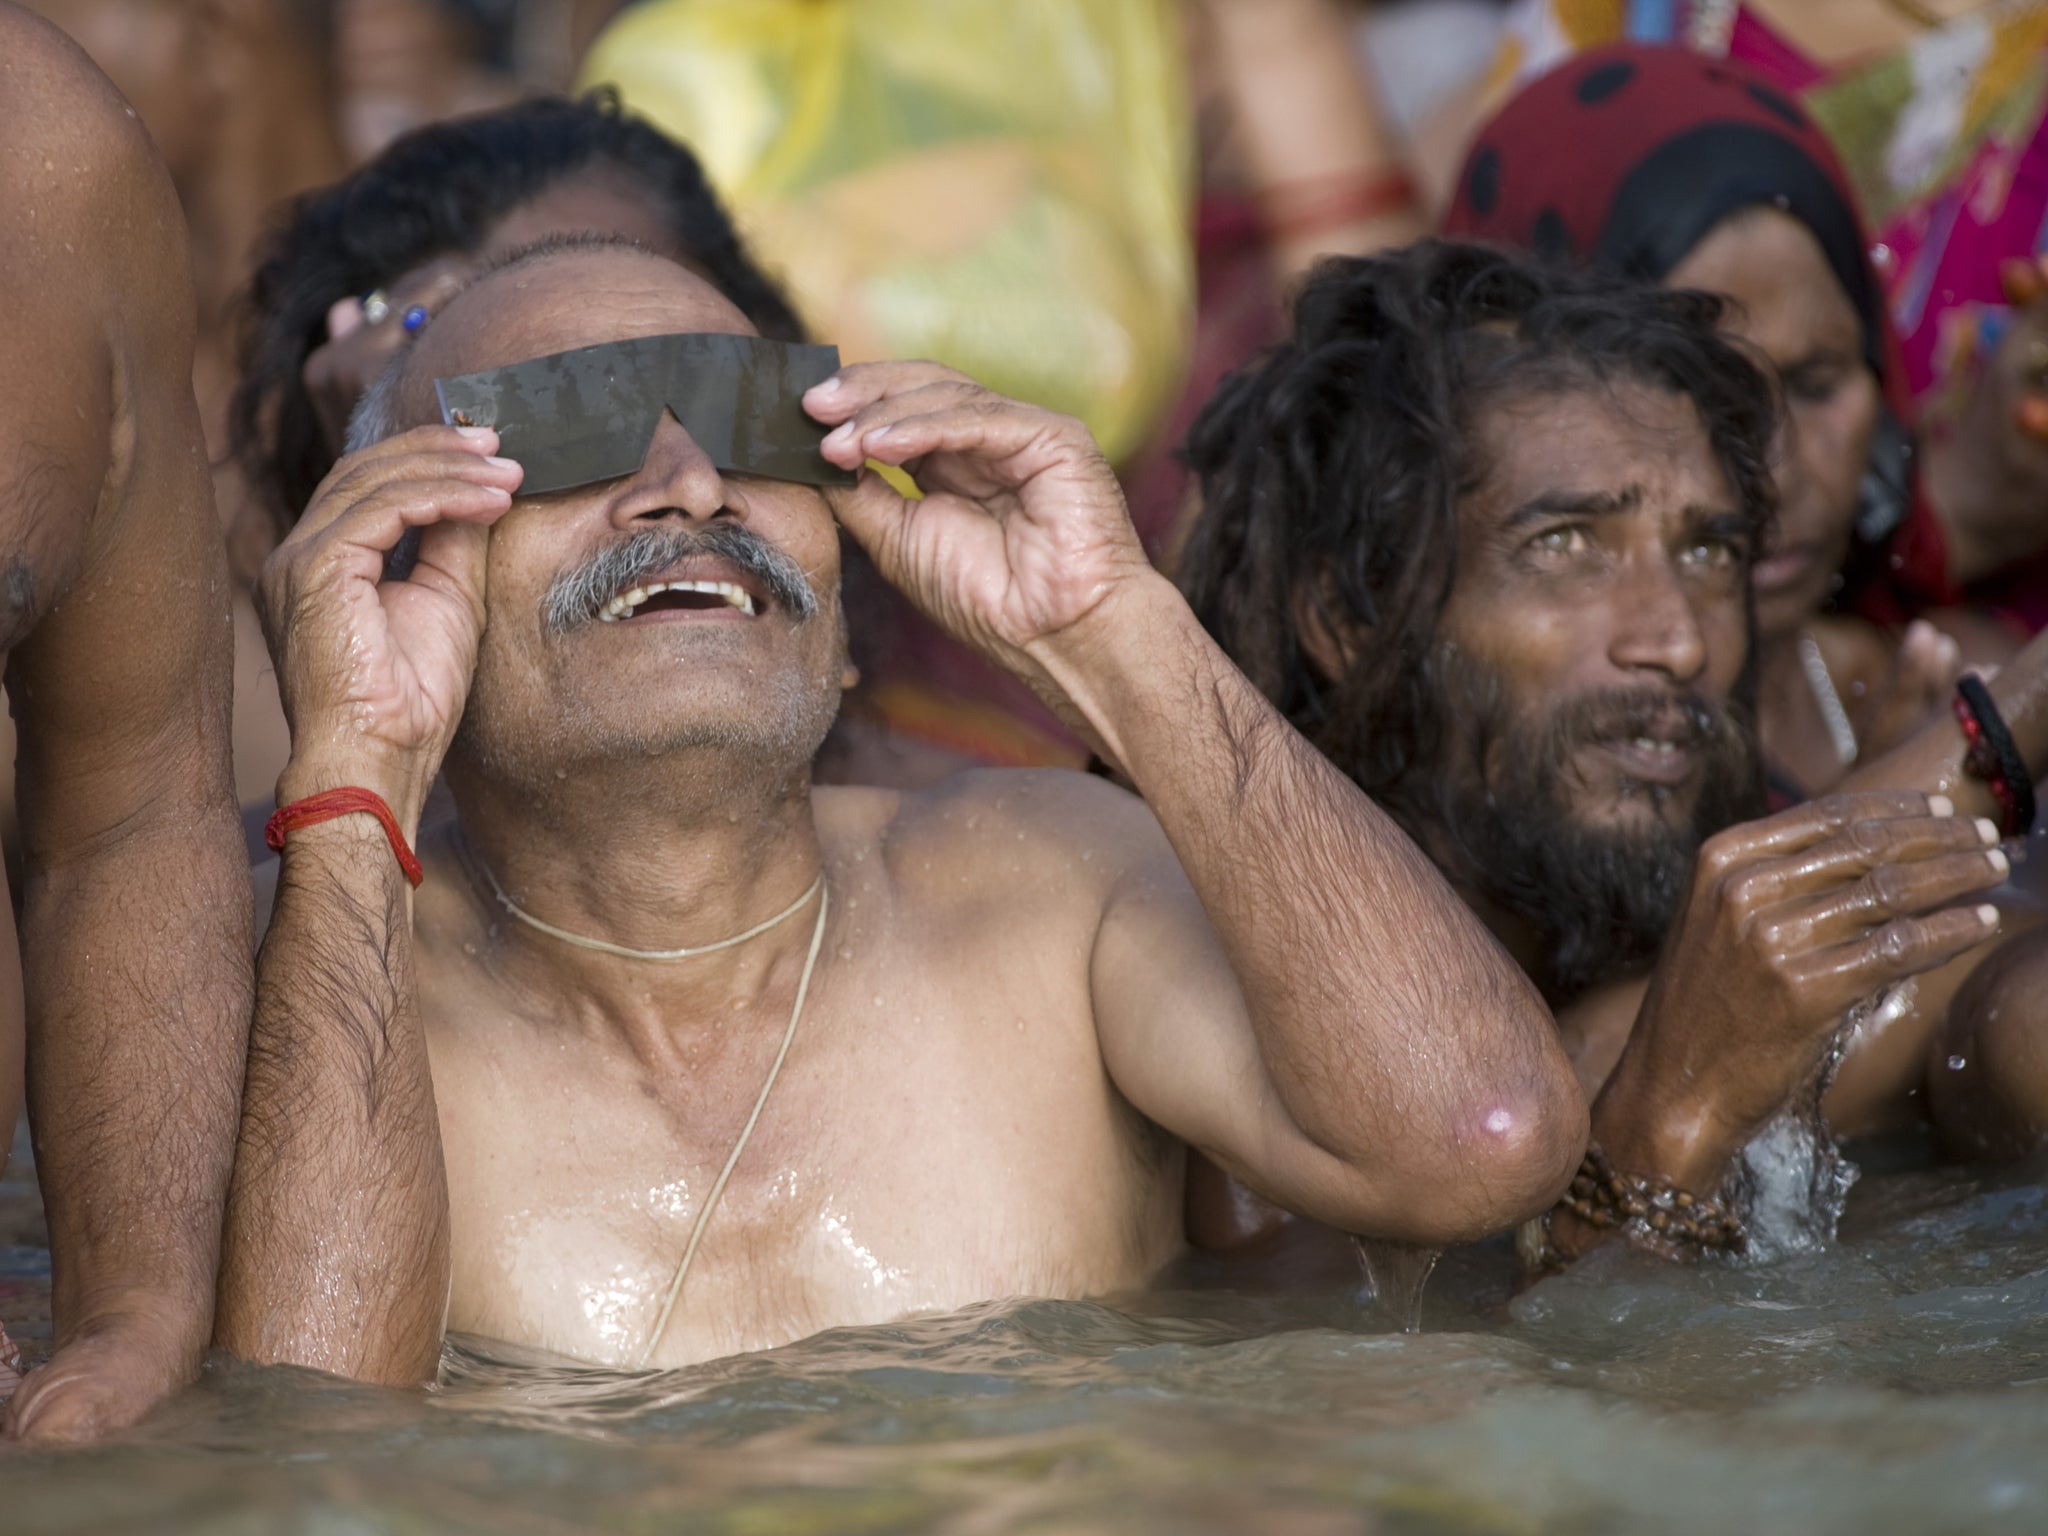 A Hindu man watches a solar eclipse as he takes a bath in the Ganges river in the Indian city of Varanasi on July 22, 2009. The longest solar eclipse of the 21st century cast a shadow over much of Asia, plunging hundreds of millions into darkness across t